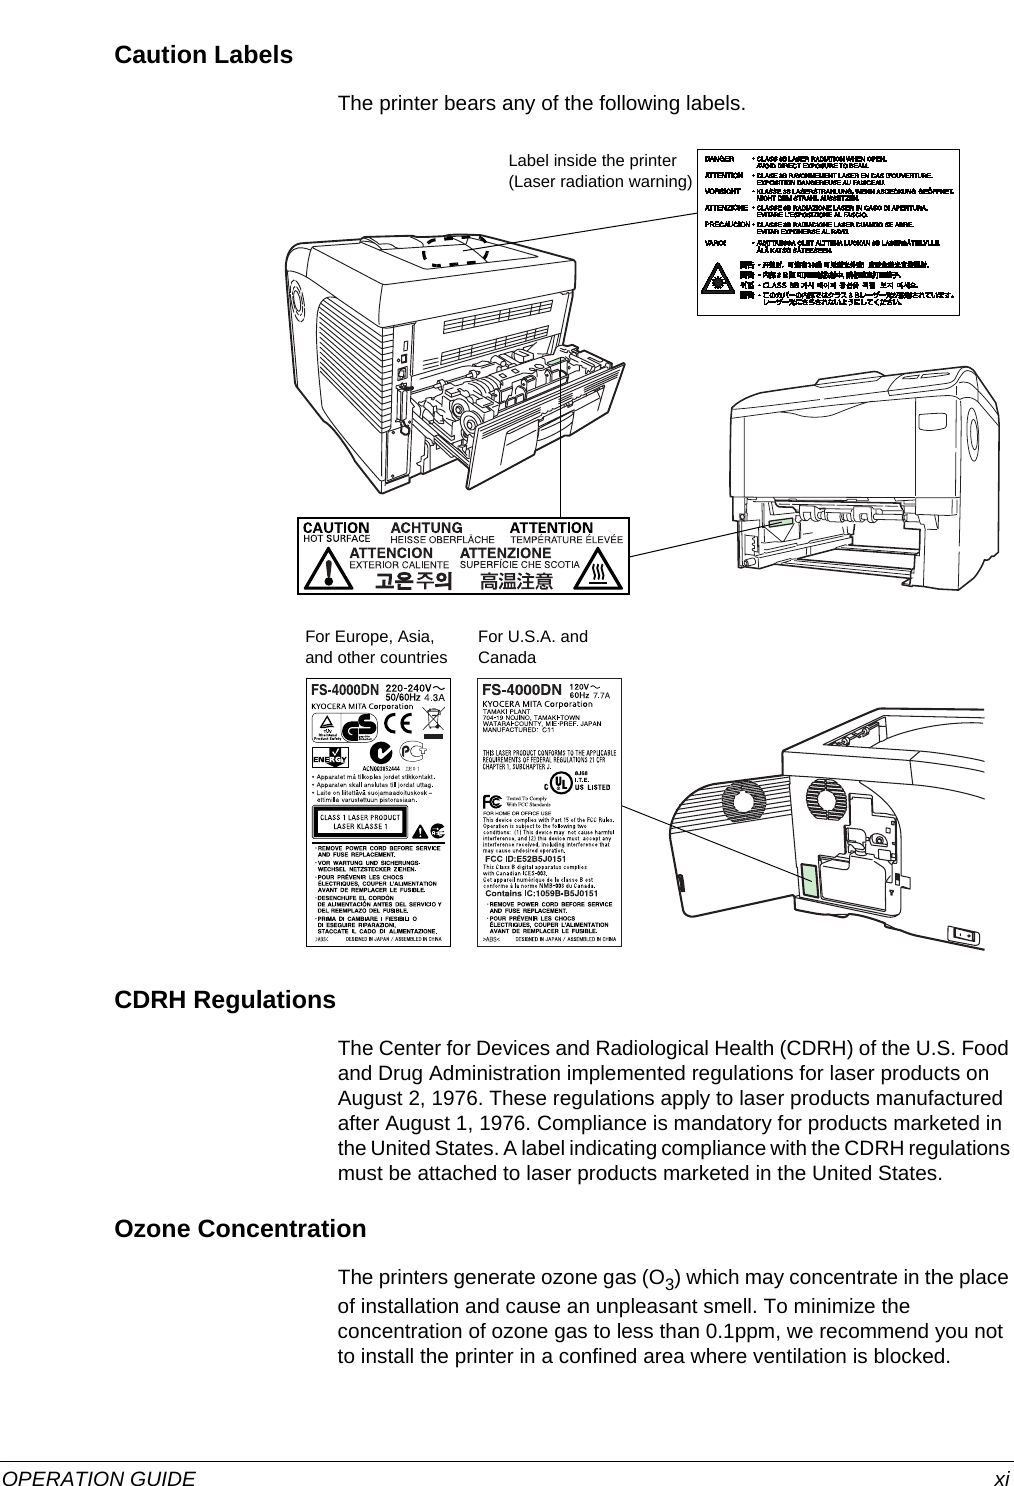  OPERATION GUIDE xiCaution LabelsThe printer bears any of the following labels. CDRH RegulationsThe Center for Devices and Radiological Health (CDRH) of the U.S. Food and Drug Administration implemented regulations for laser products on August 2, 1976. These regulations apply to laser products manufactured after August 1, 1976. Compliance is mandatory for products marketed in the United States. A label indicating compliance with the CDRH regulations must be attached to laser products marketed in the United States.Ozone ConcentrationThe printers generate ozone gas (O3) which may concentrate in the place of installation and cause an unpleasant smell. To minimize the concentration of ozone gas to less than 0.1ppm, we recommend you not to install the printer in a confined area where ventilation is blocked.For Europe, Asia, and other countriesFor U.S.A. and CanadaLabel inside the printer (Laser radiation warning)